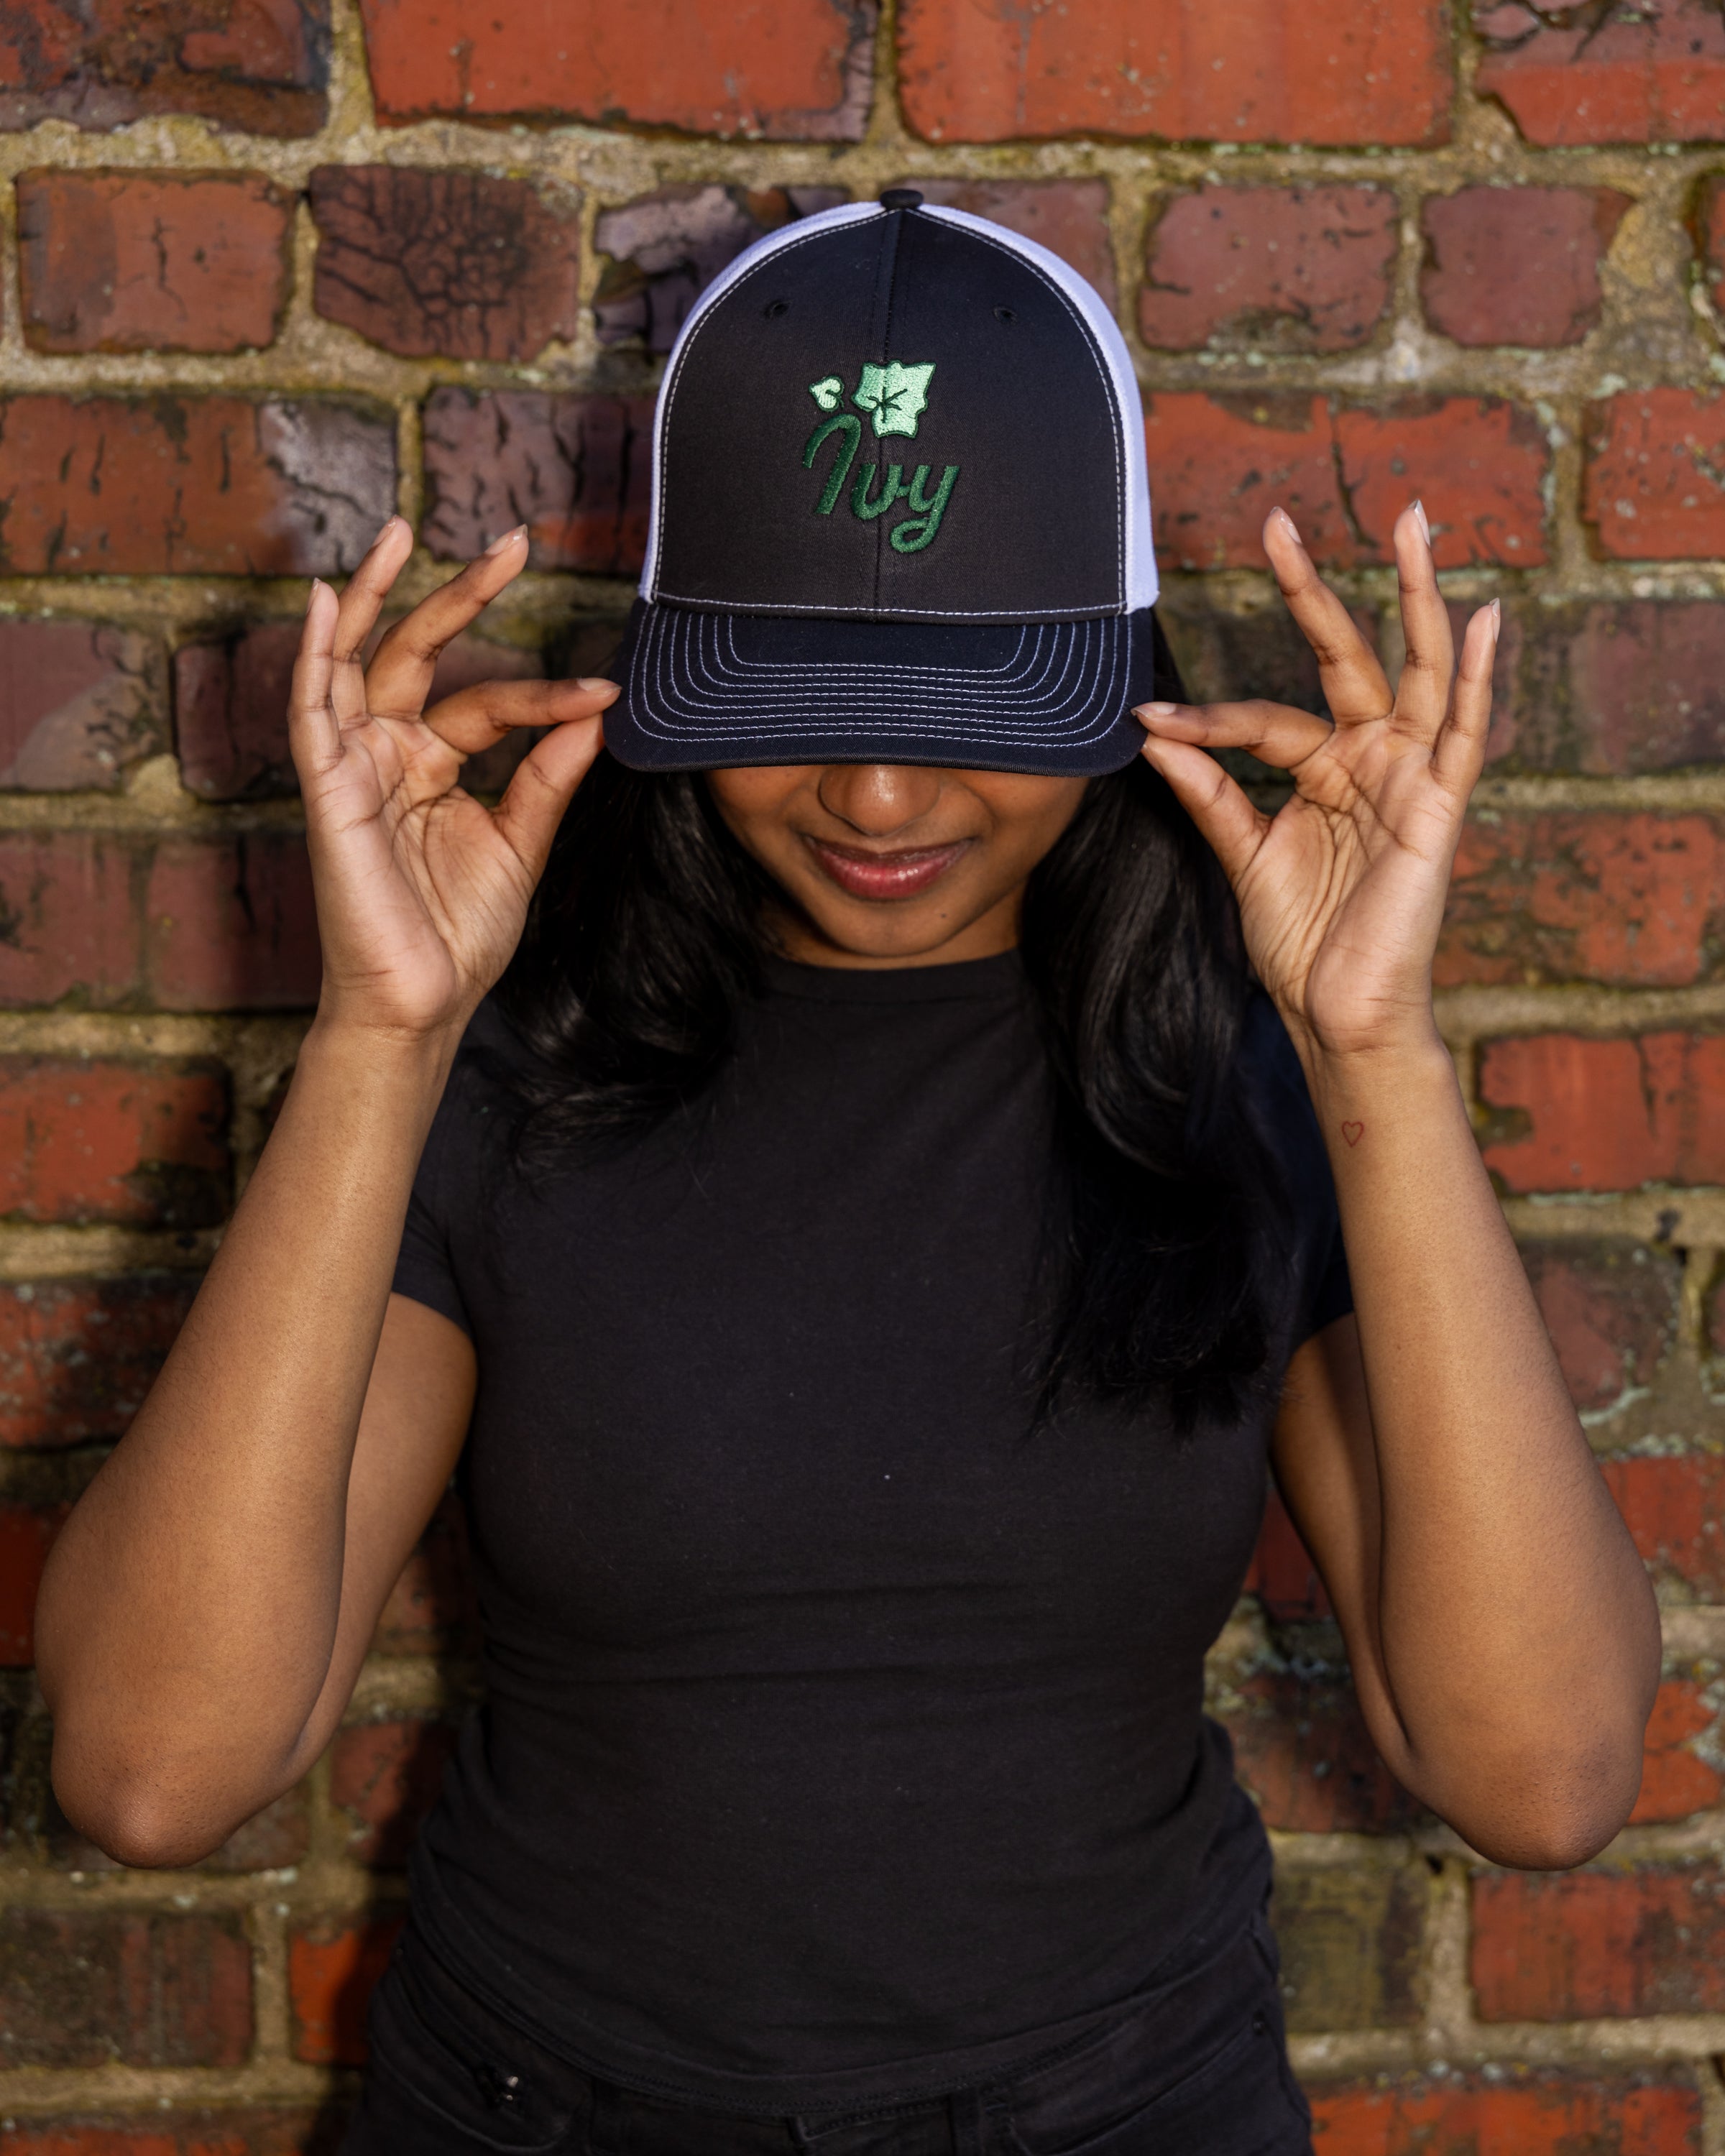 Ivy with Cluster Black Trucker Hat